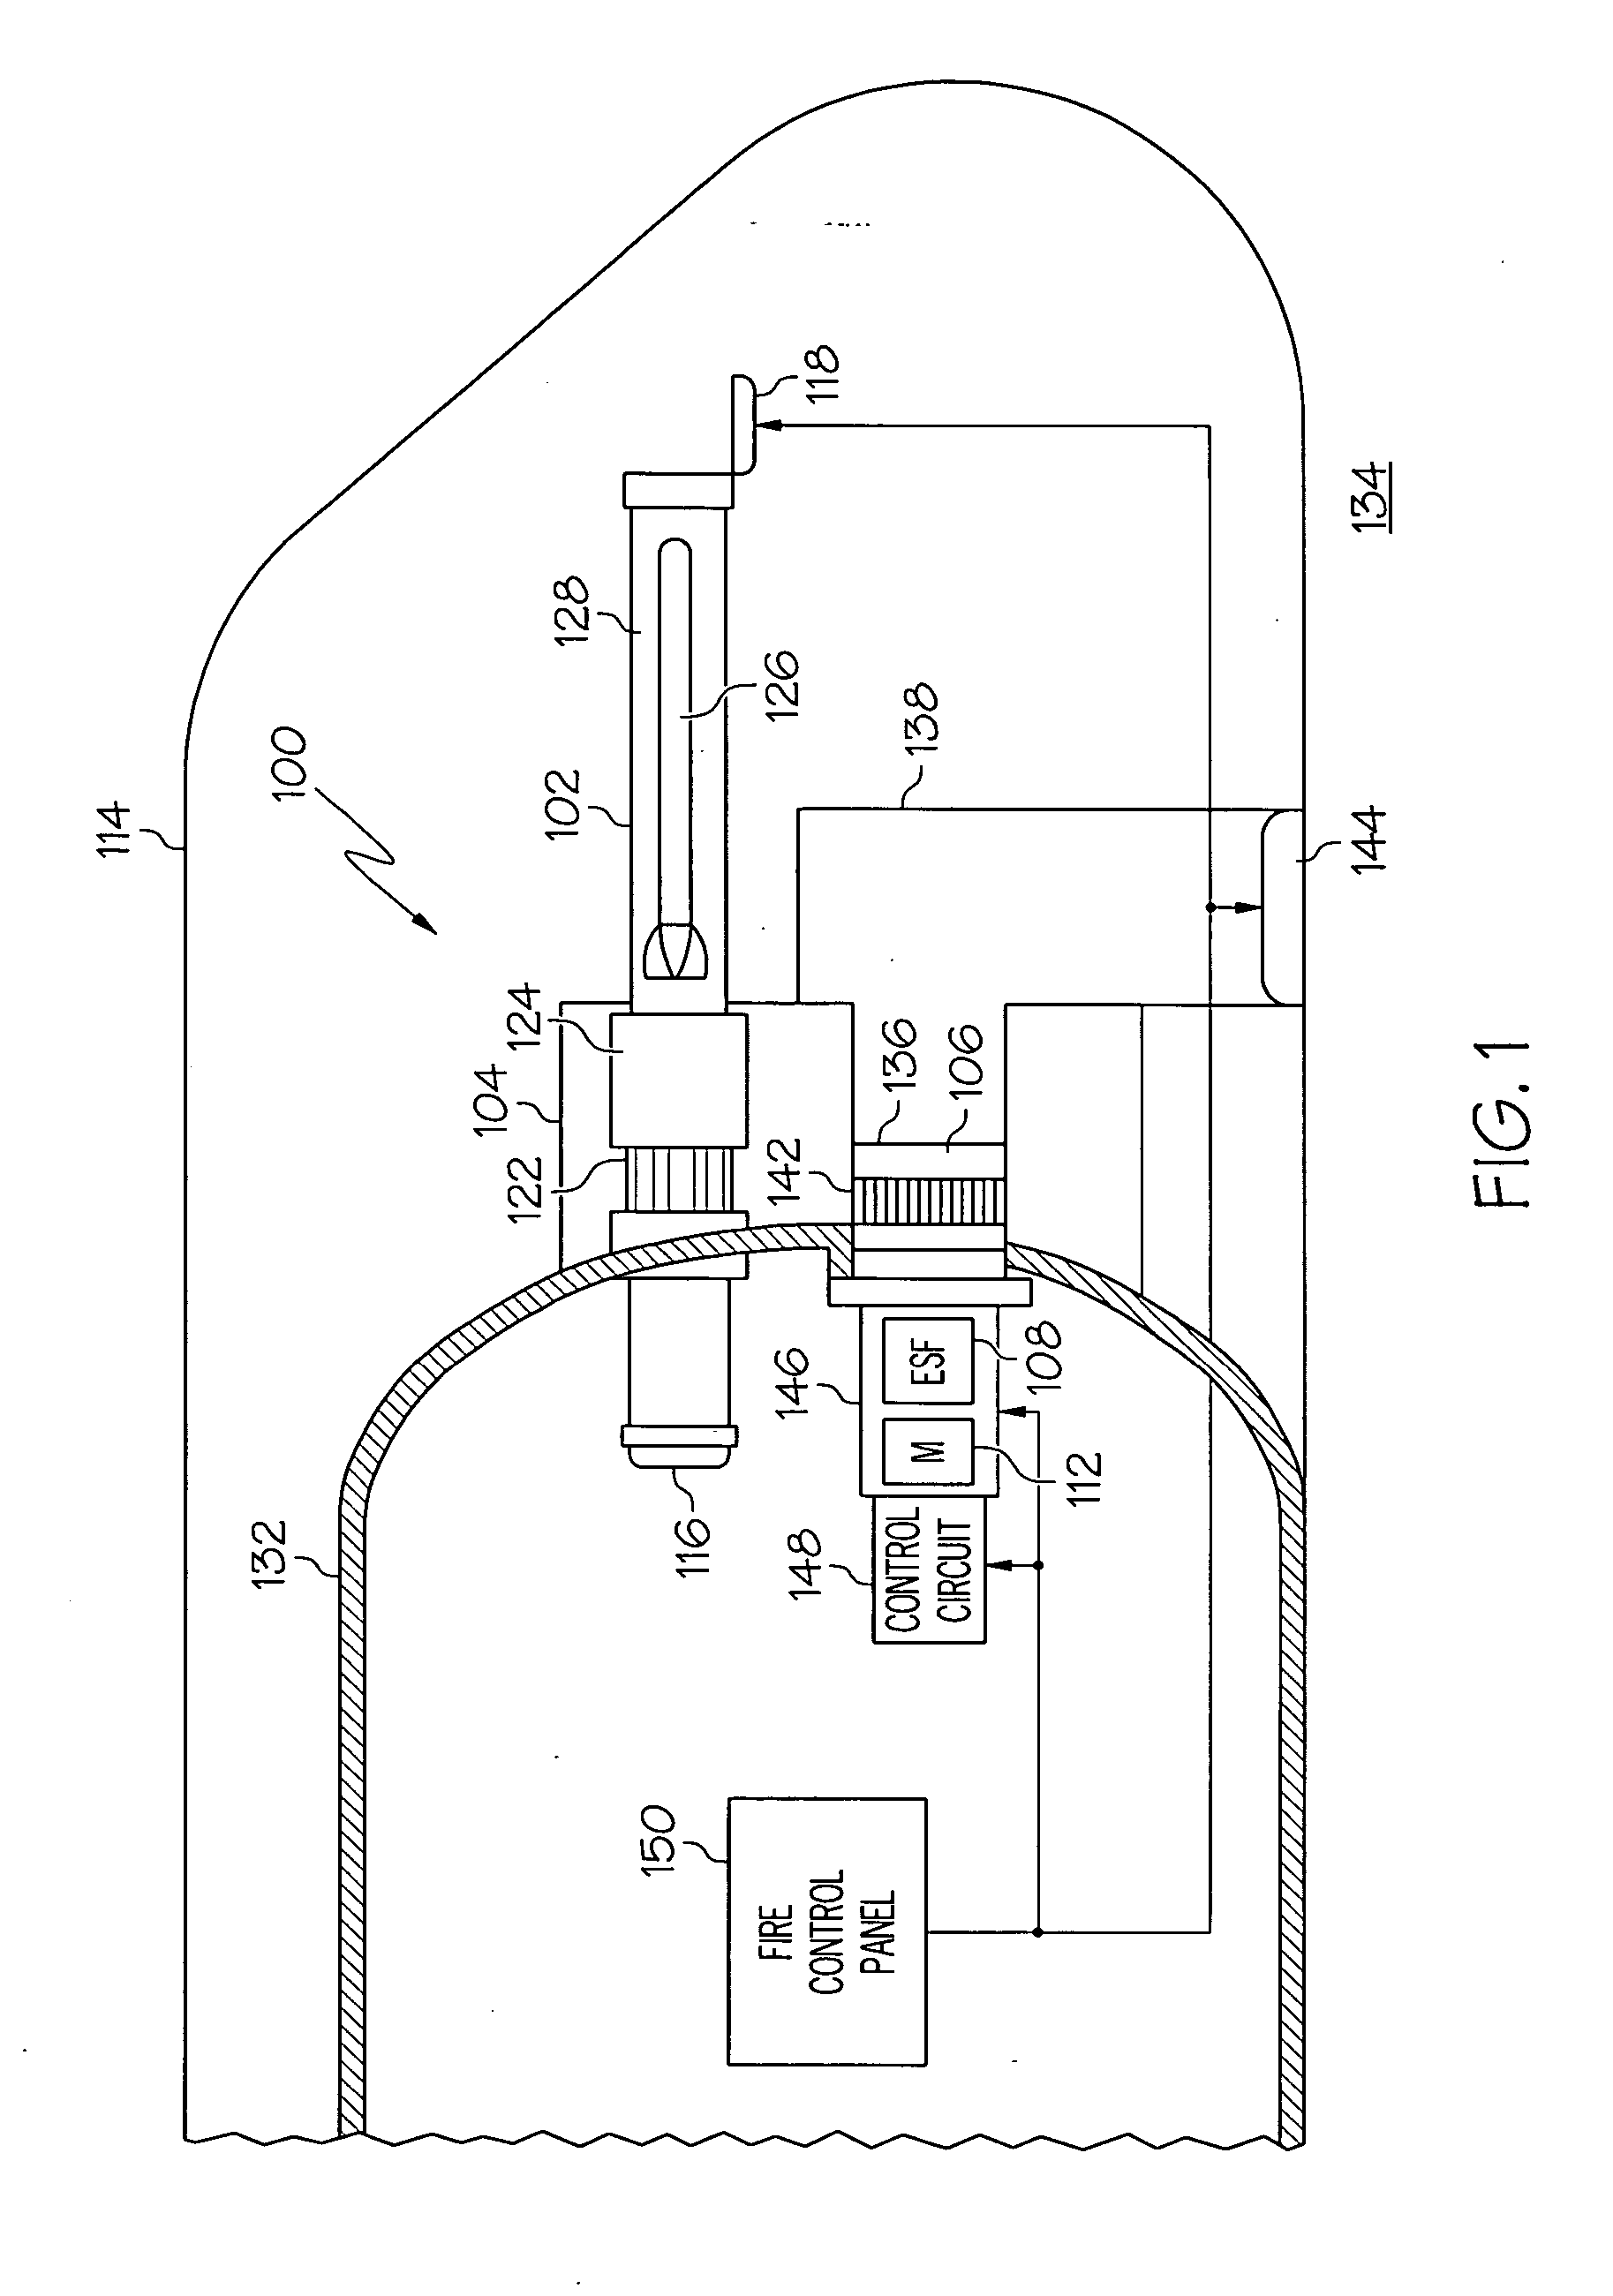 Submersible vehicle object ejection system using a flywheel driven boost pump